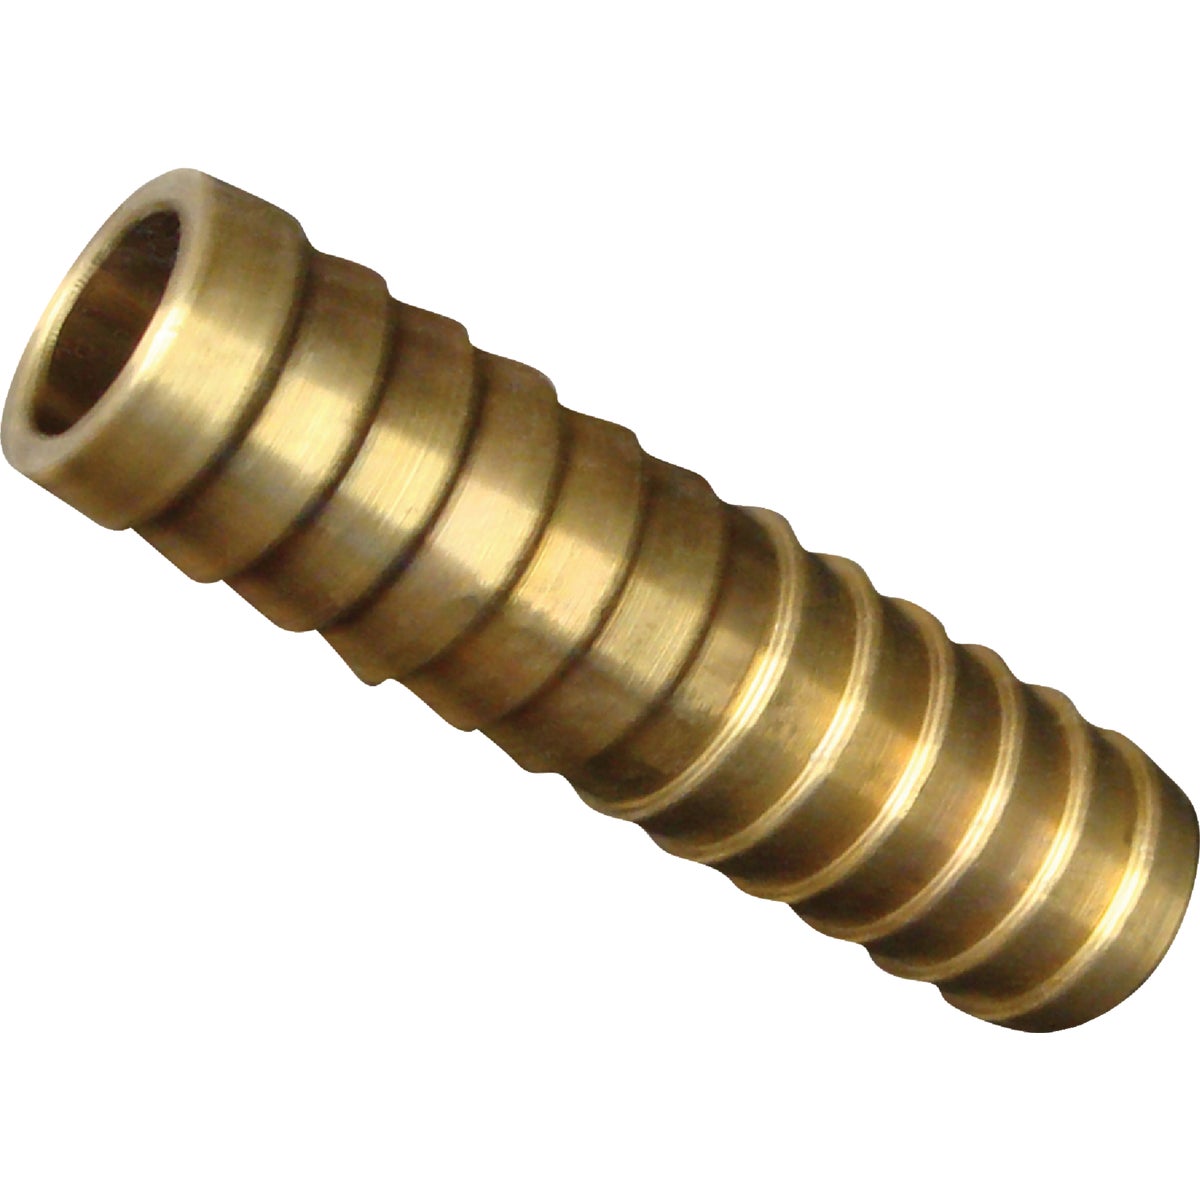 Item 461011, Red brass insert coupling. Manufactured to include no more than 0.